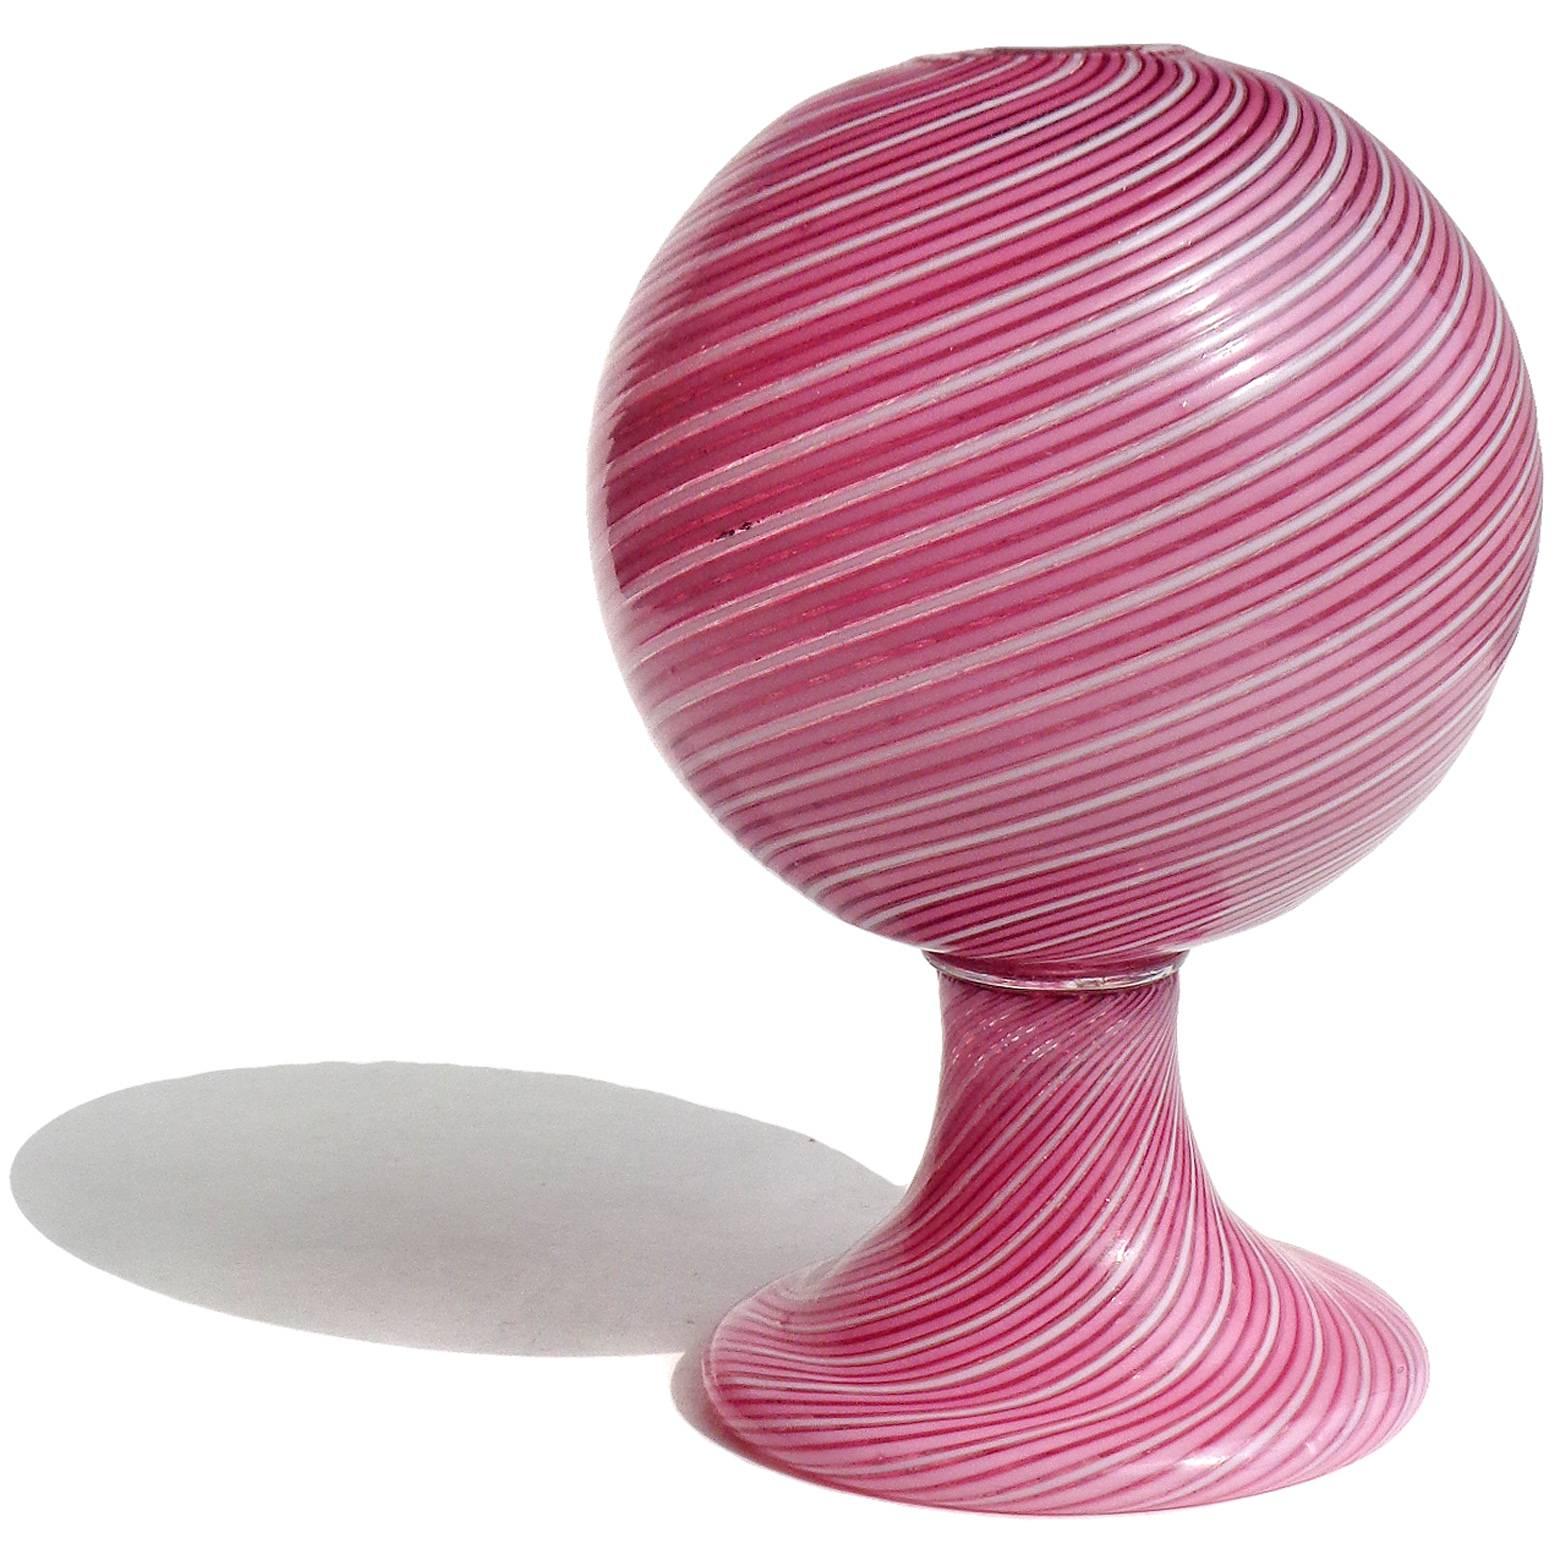 Free shipping worldwide! See details below description.

Beautiful Murano handblown pink and white "Filigrana" ribbons art glass flower "Specimen" vase. Documented to designer Dino Martens for Aureliano Toso. Still retains the